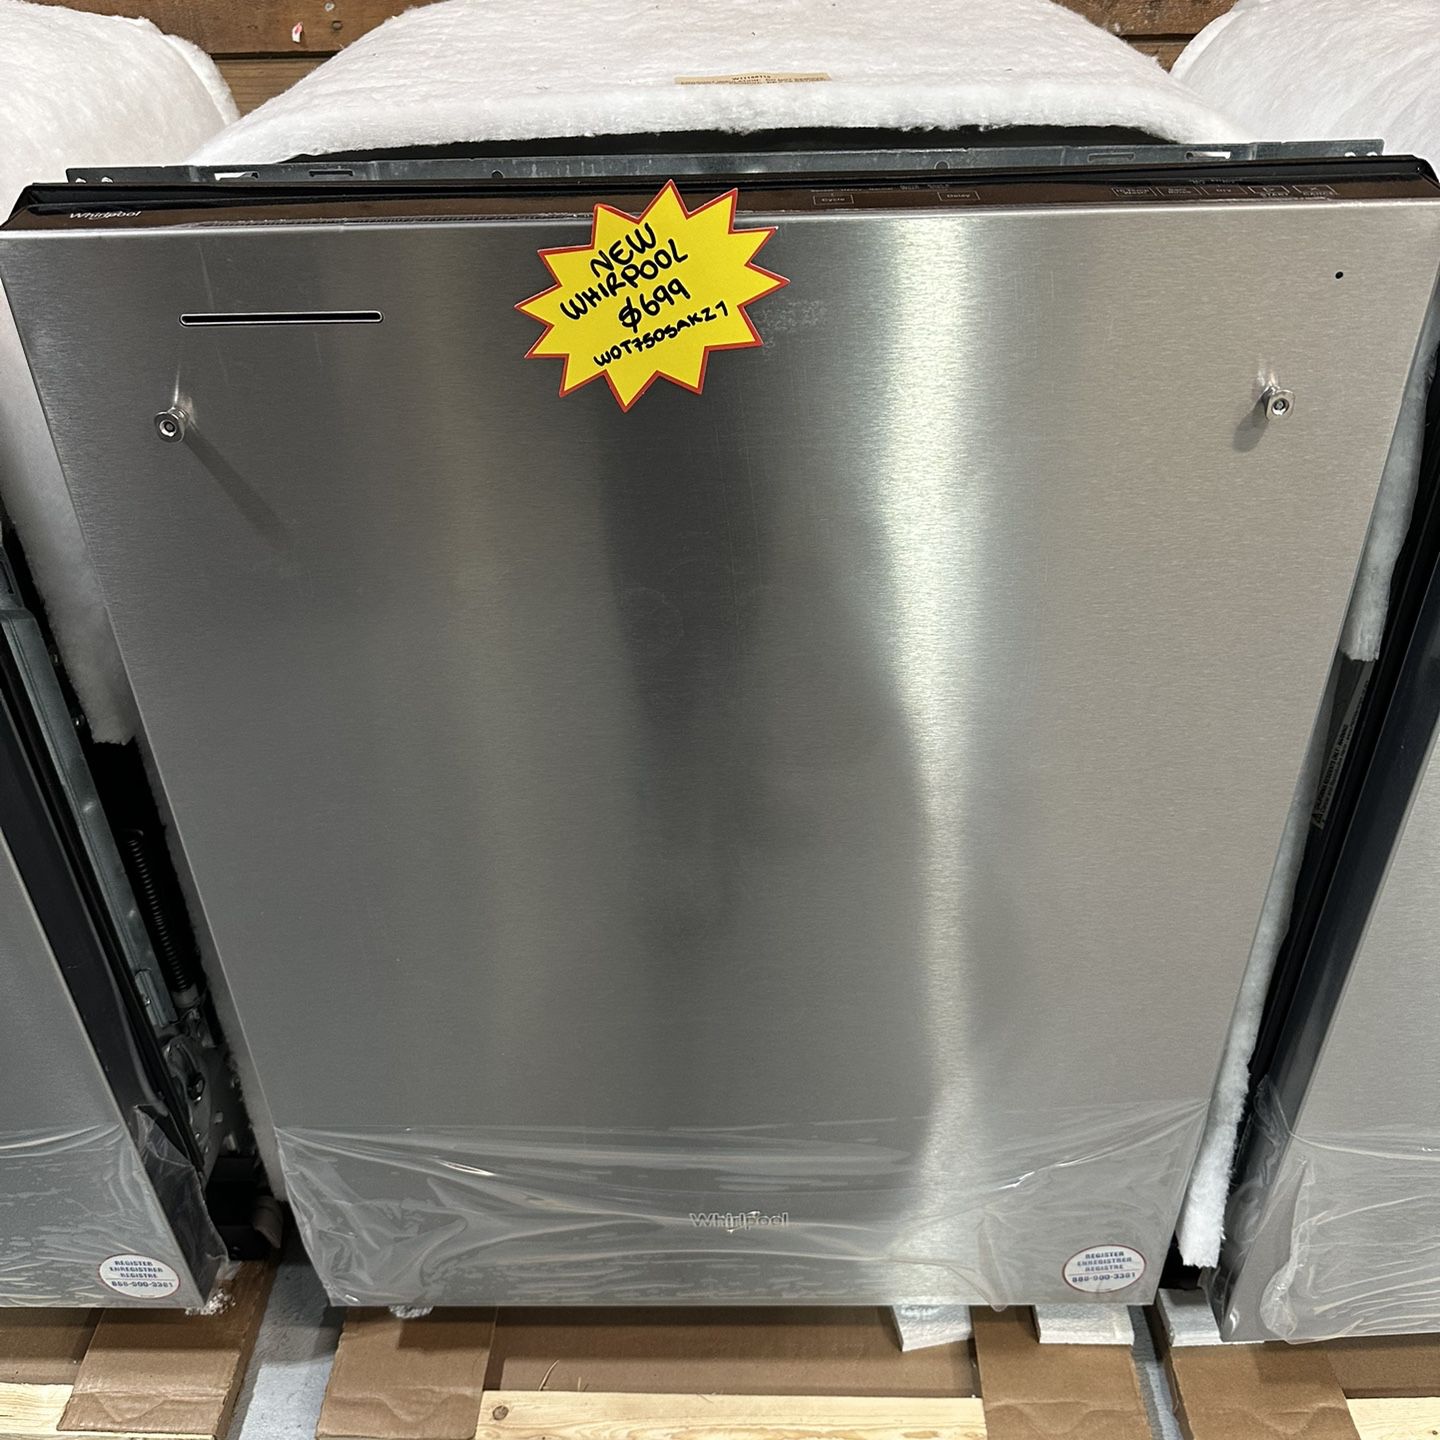 NEW WHIRLPOOL DISHWASHER (LACEY)